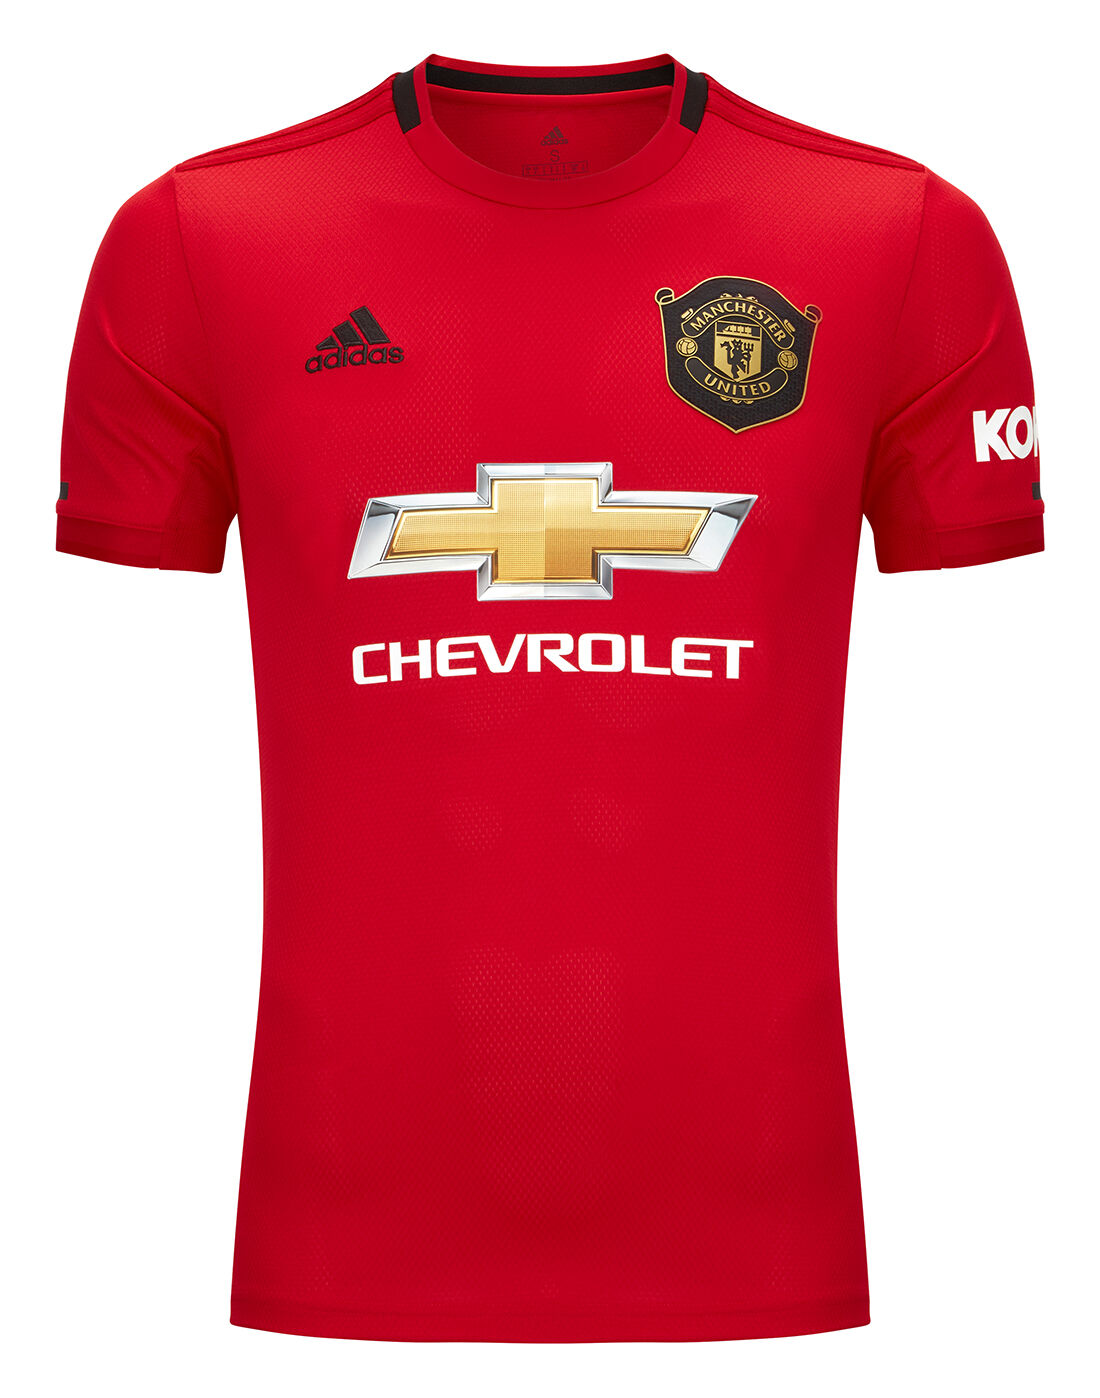 manchester united jersey by year